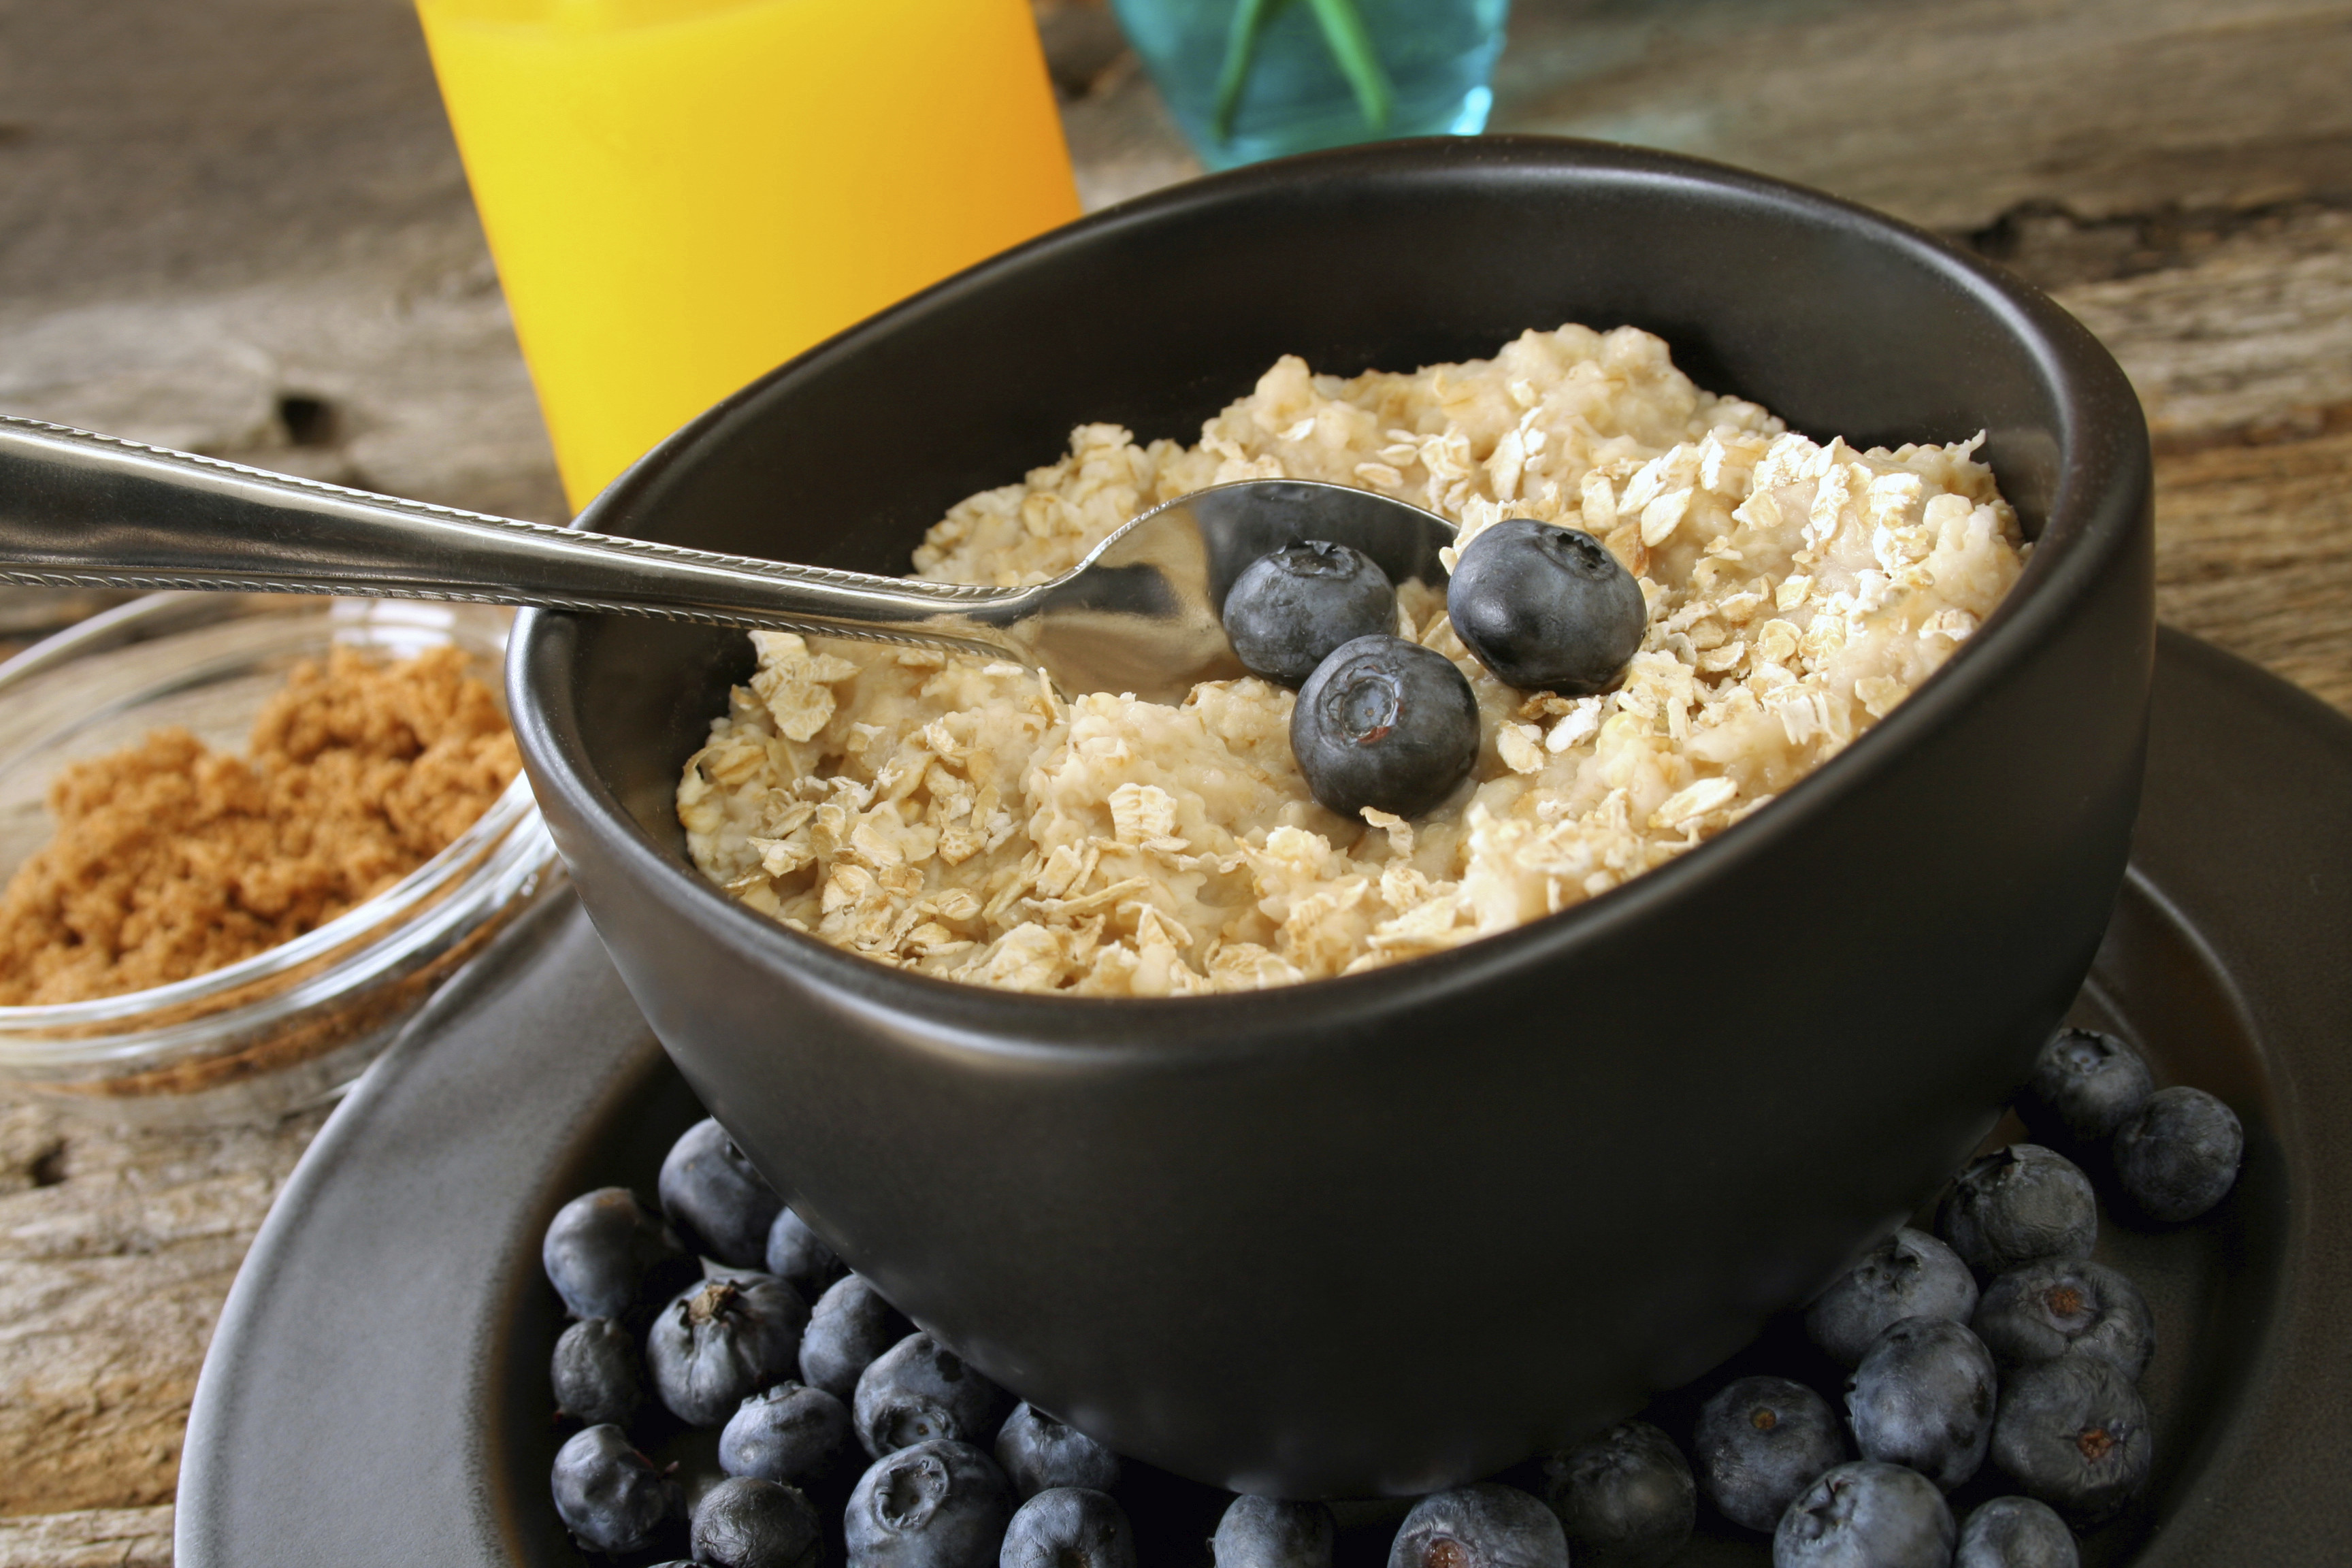 Is Oatmeal A Healthy Breakfast
 Top Strategies to Get Kids to Eat Oatmeal